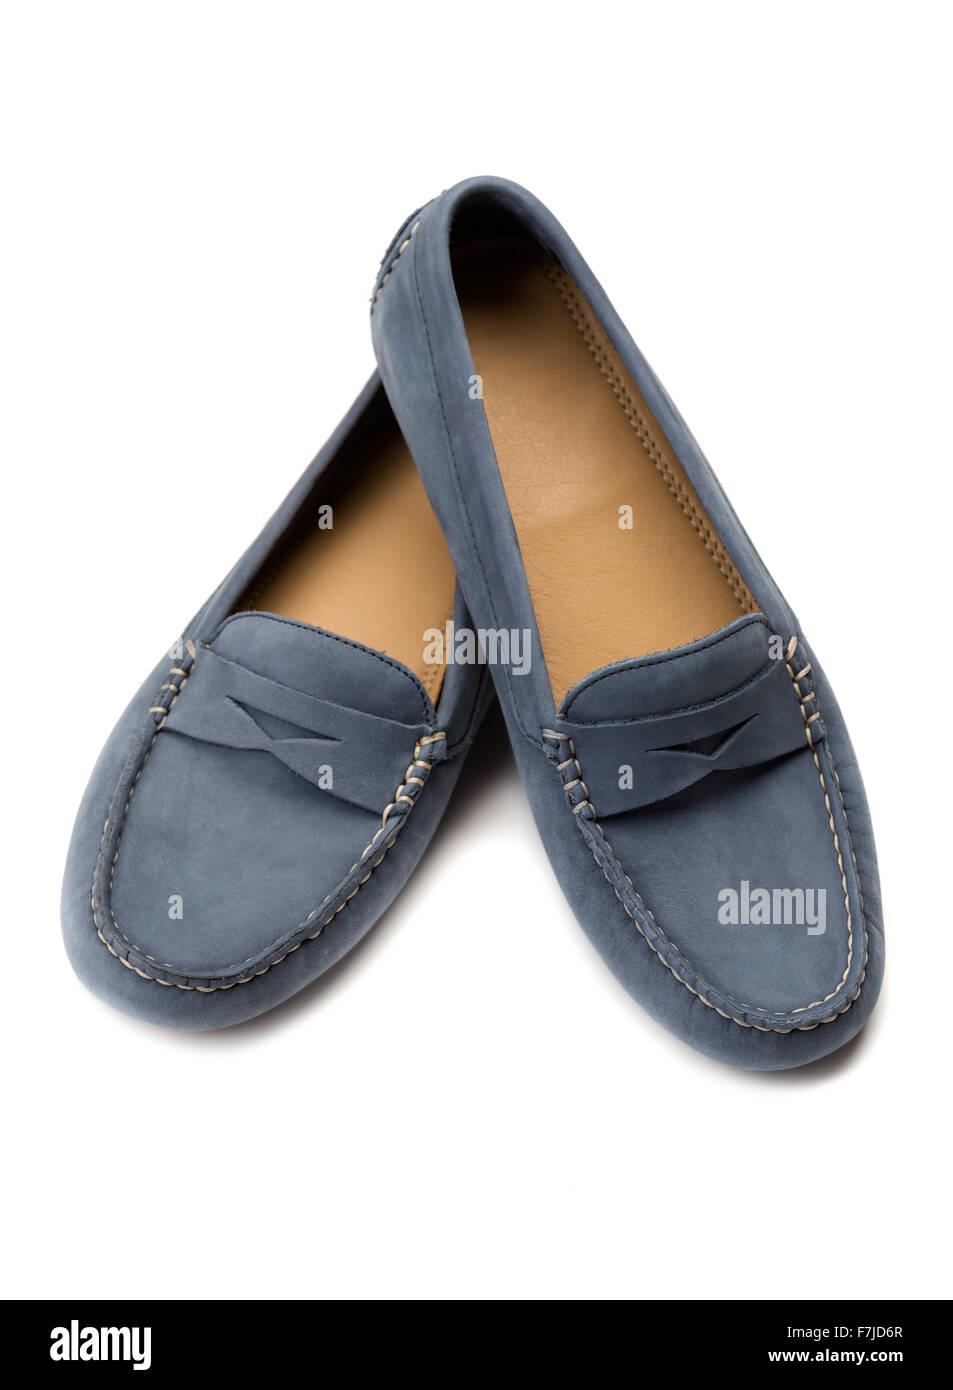 Blue suede shoes. Studio. Isolate on white background. Stock Photo